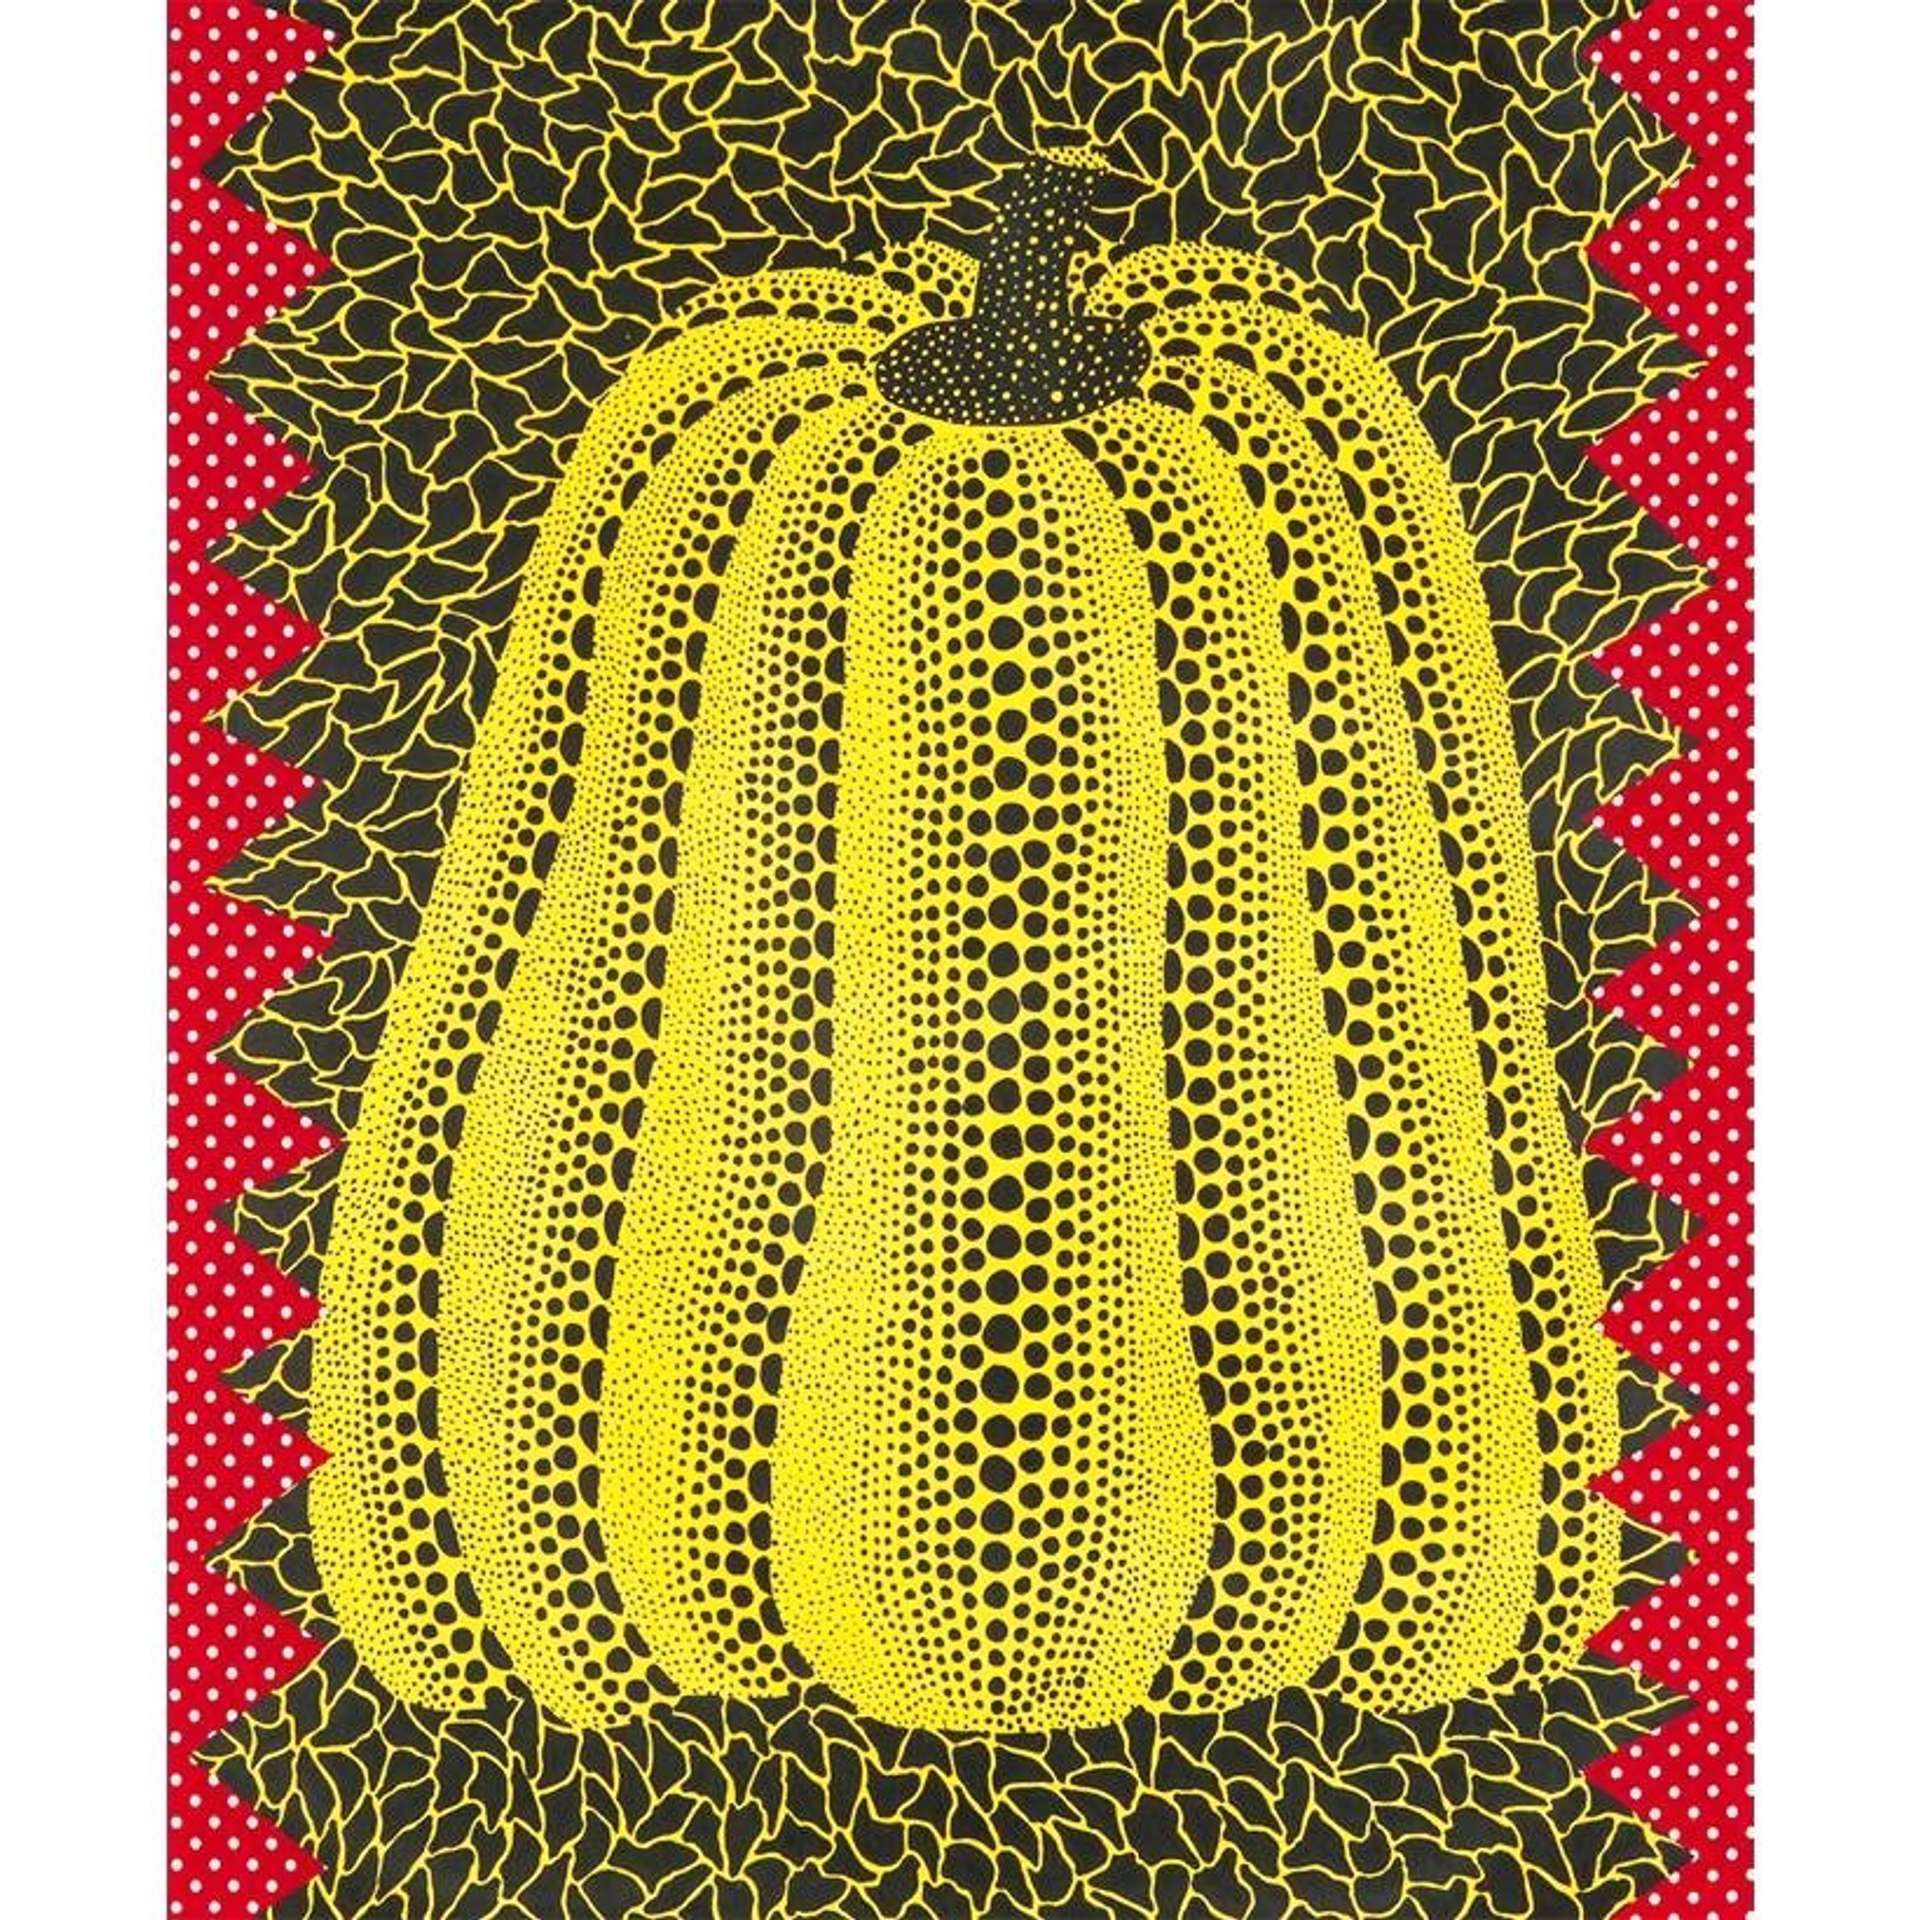 Yayoi Kusama's Pumpkin (yellow) , Kusama 4. A lithograph of a pumpkin created out of a pattern of yellow and black polka dots against a geometric patterned background